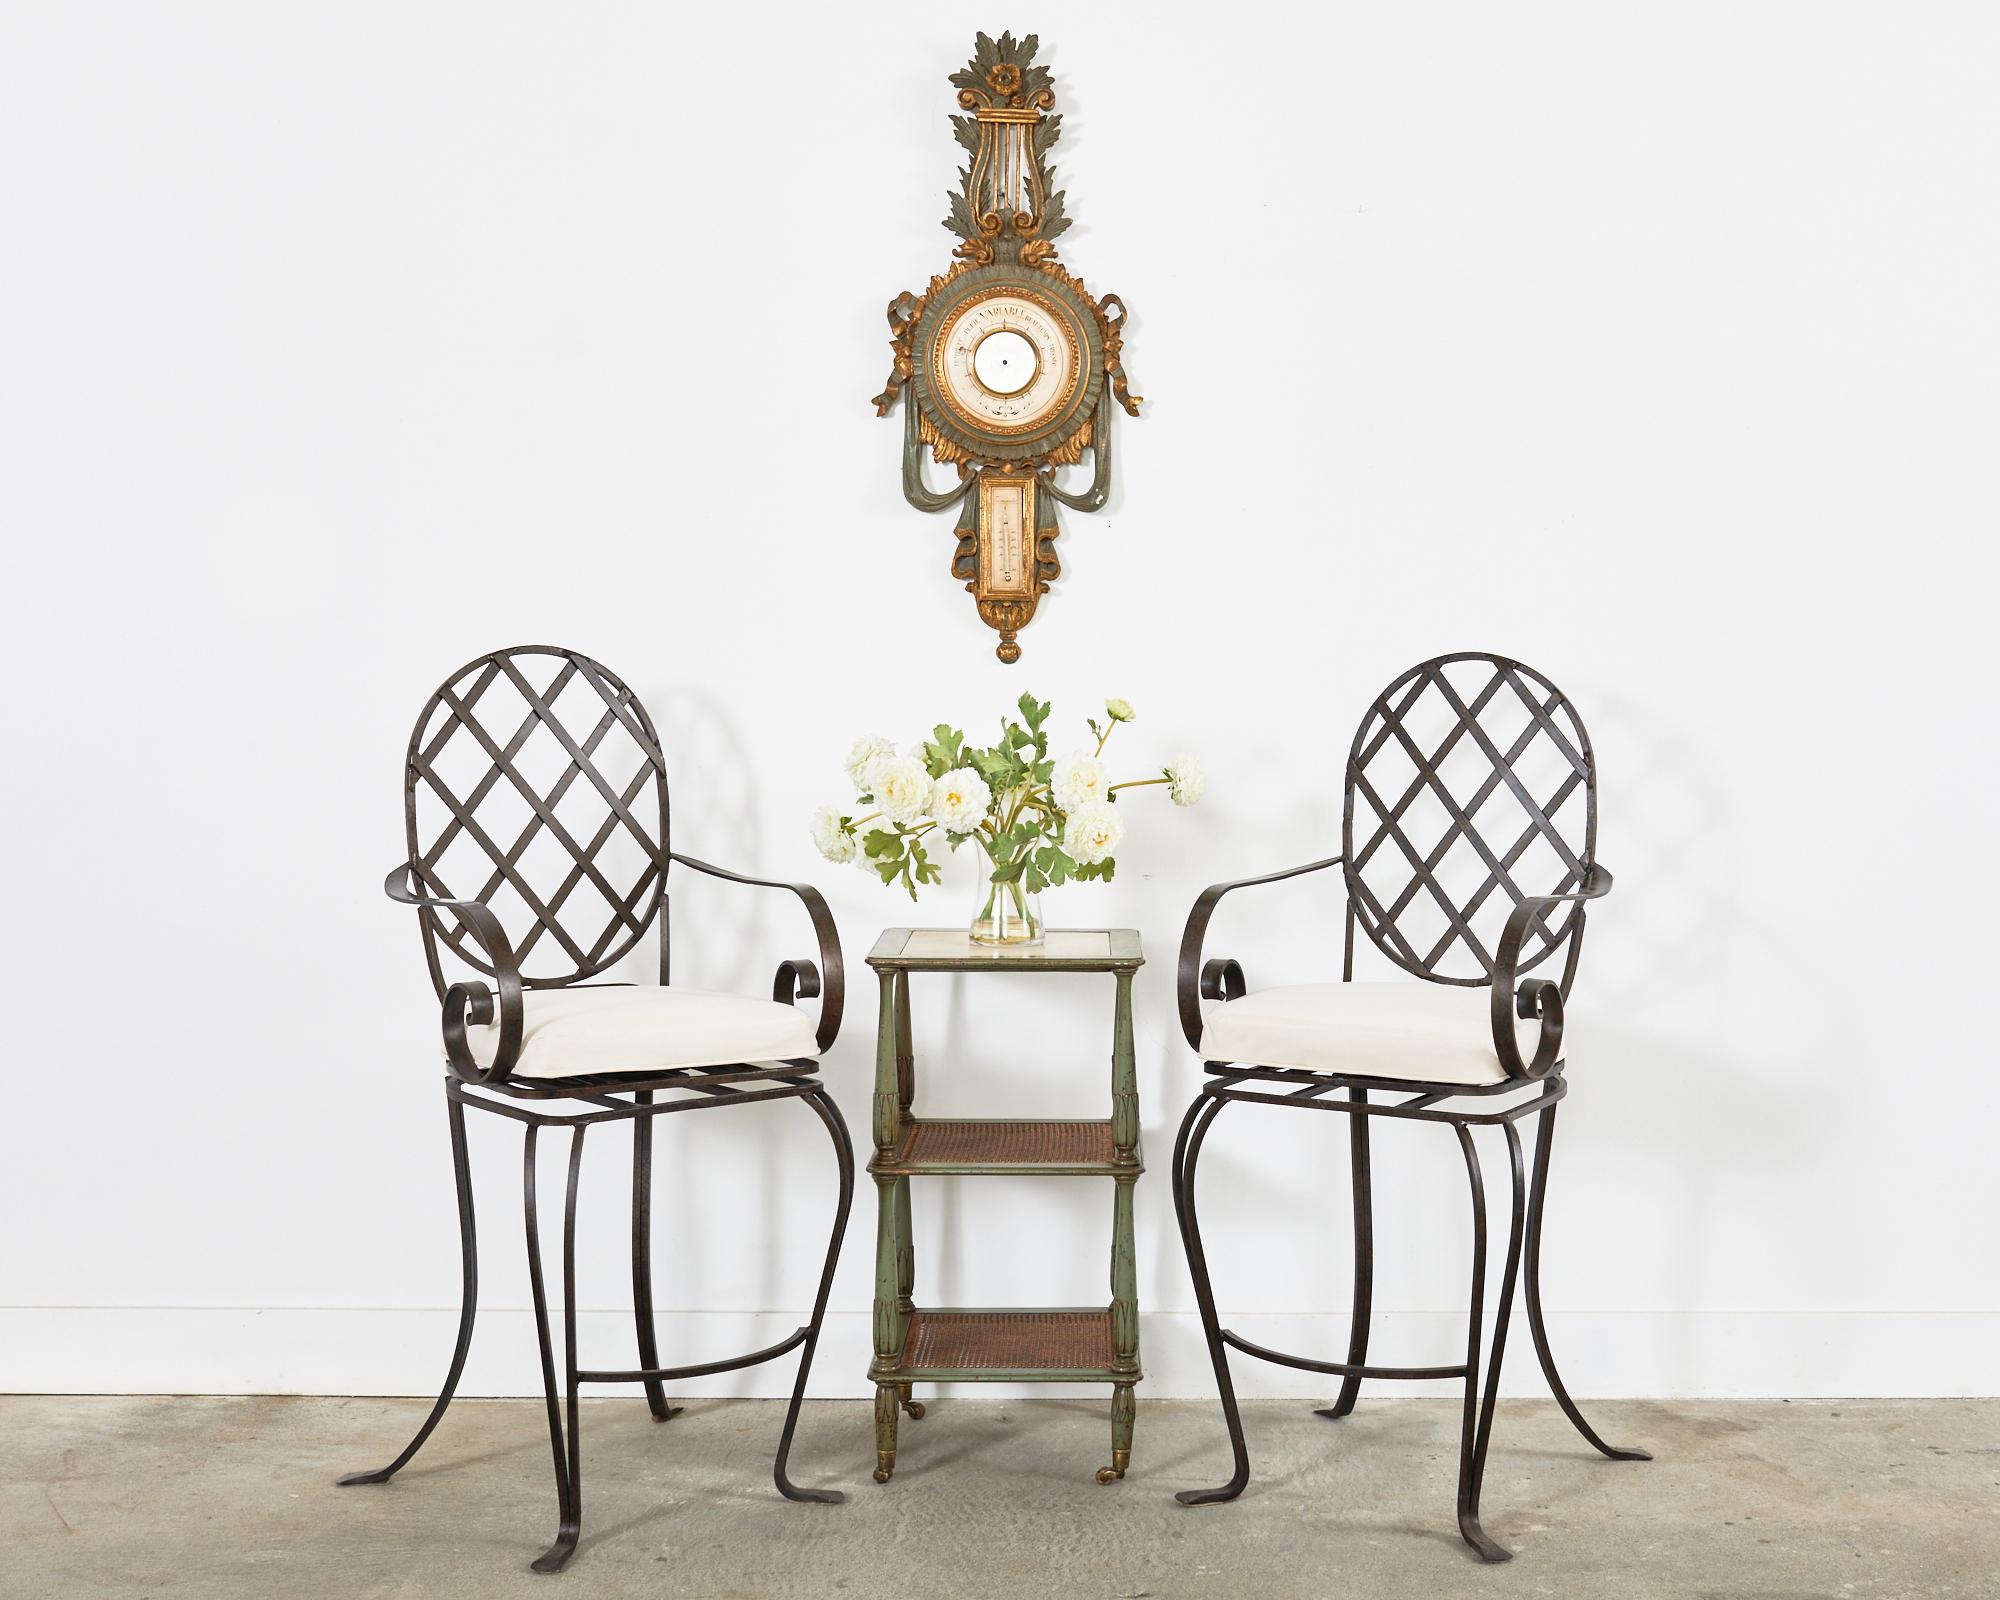 Attractive pair of iron swivel patio and garden bar stools featuring an iron lattice inset seat and back in the style of Rose Tarlow Melrose House. Produced by a foundry in Los Angeles, CA in the style of Mario Papperzini for John Salterini with